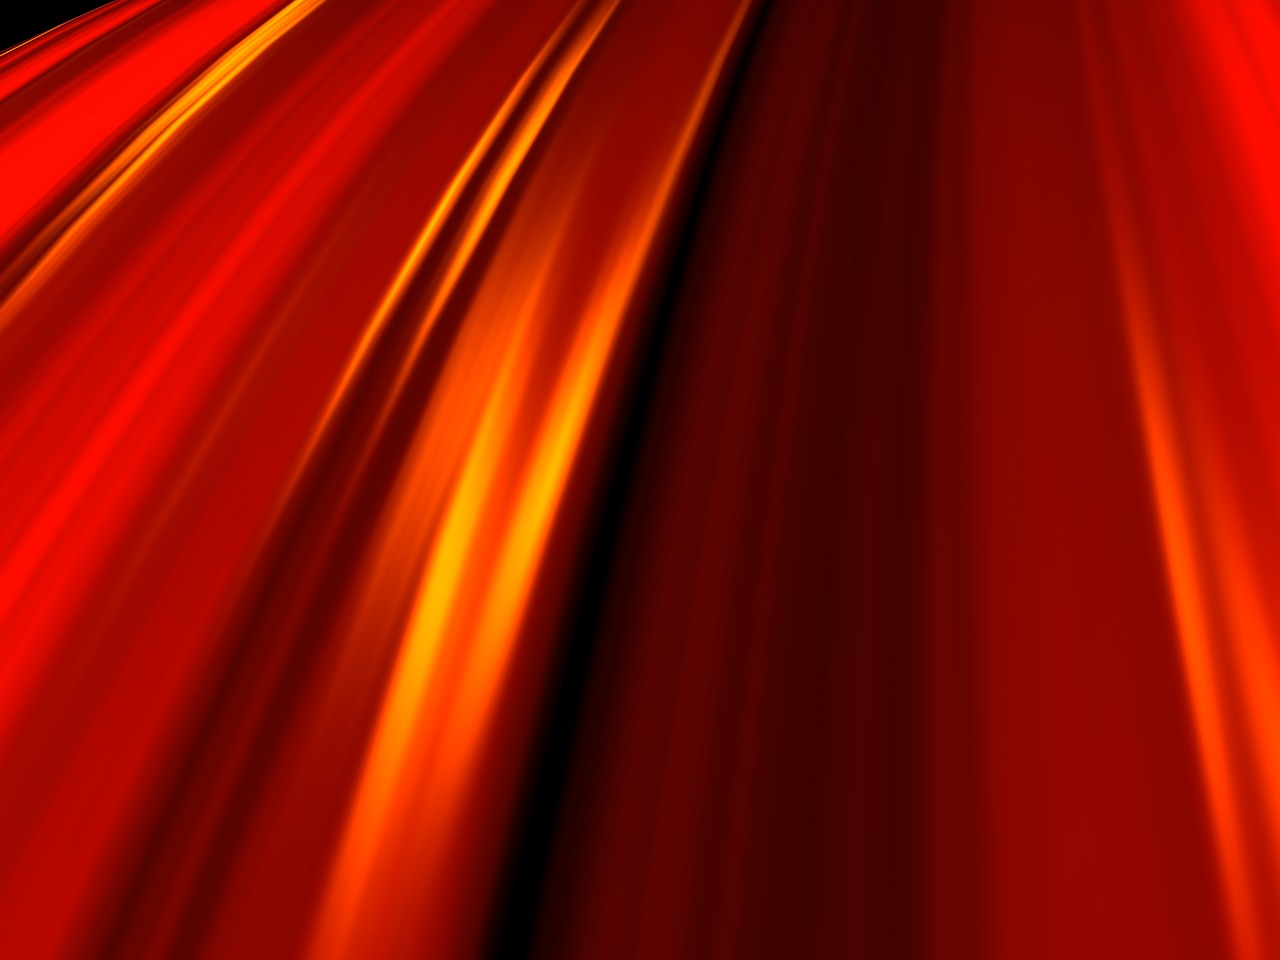 Image - abstract red lines design texture